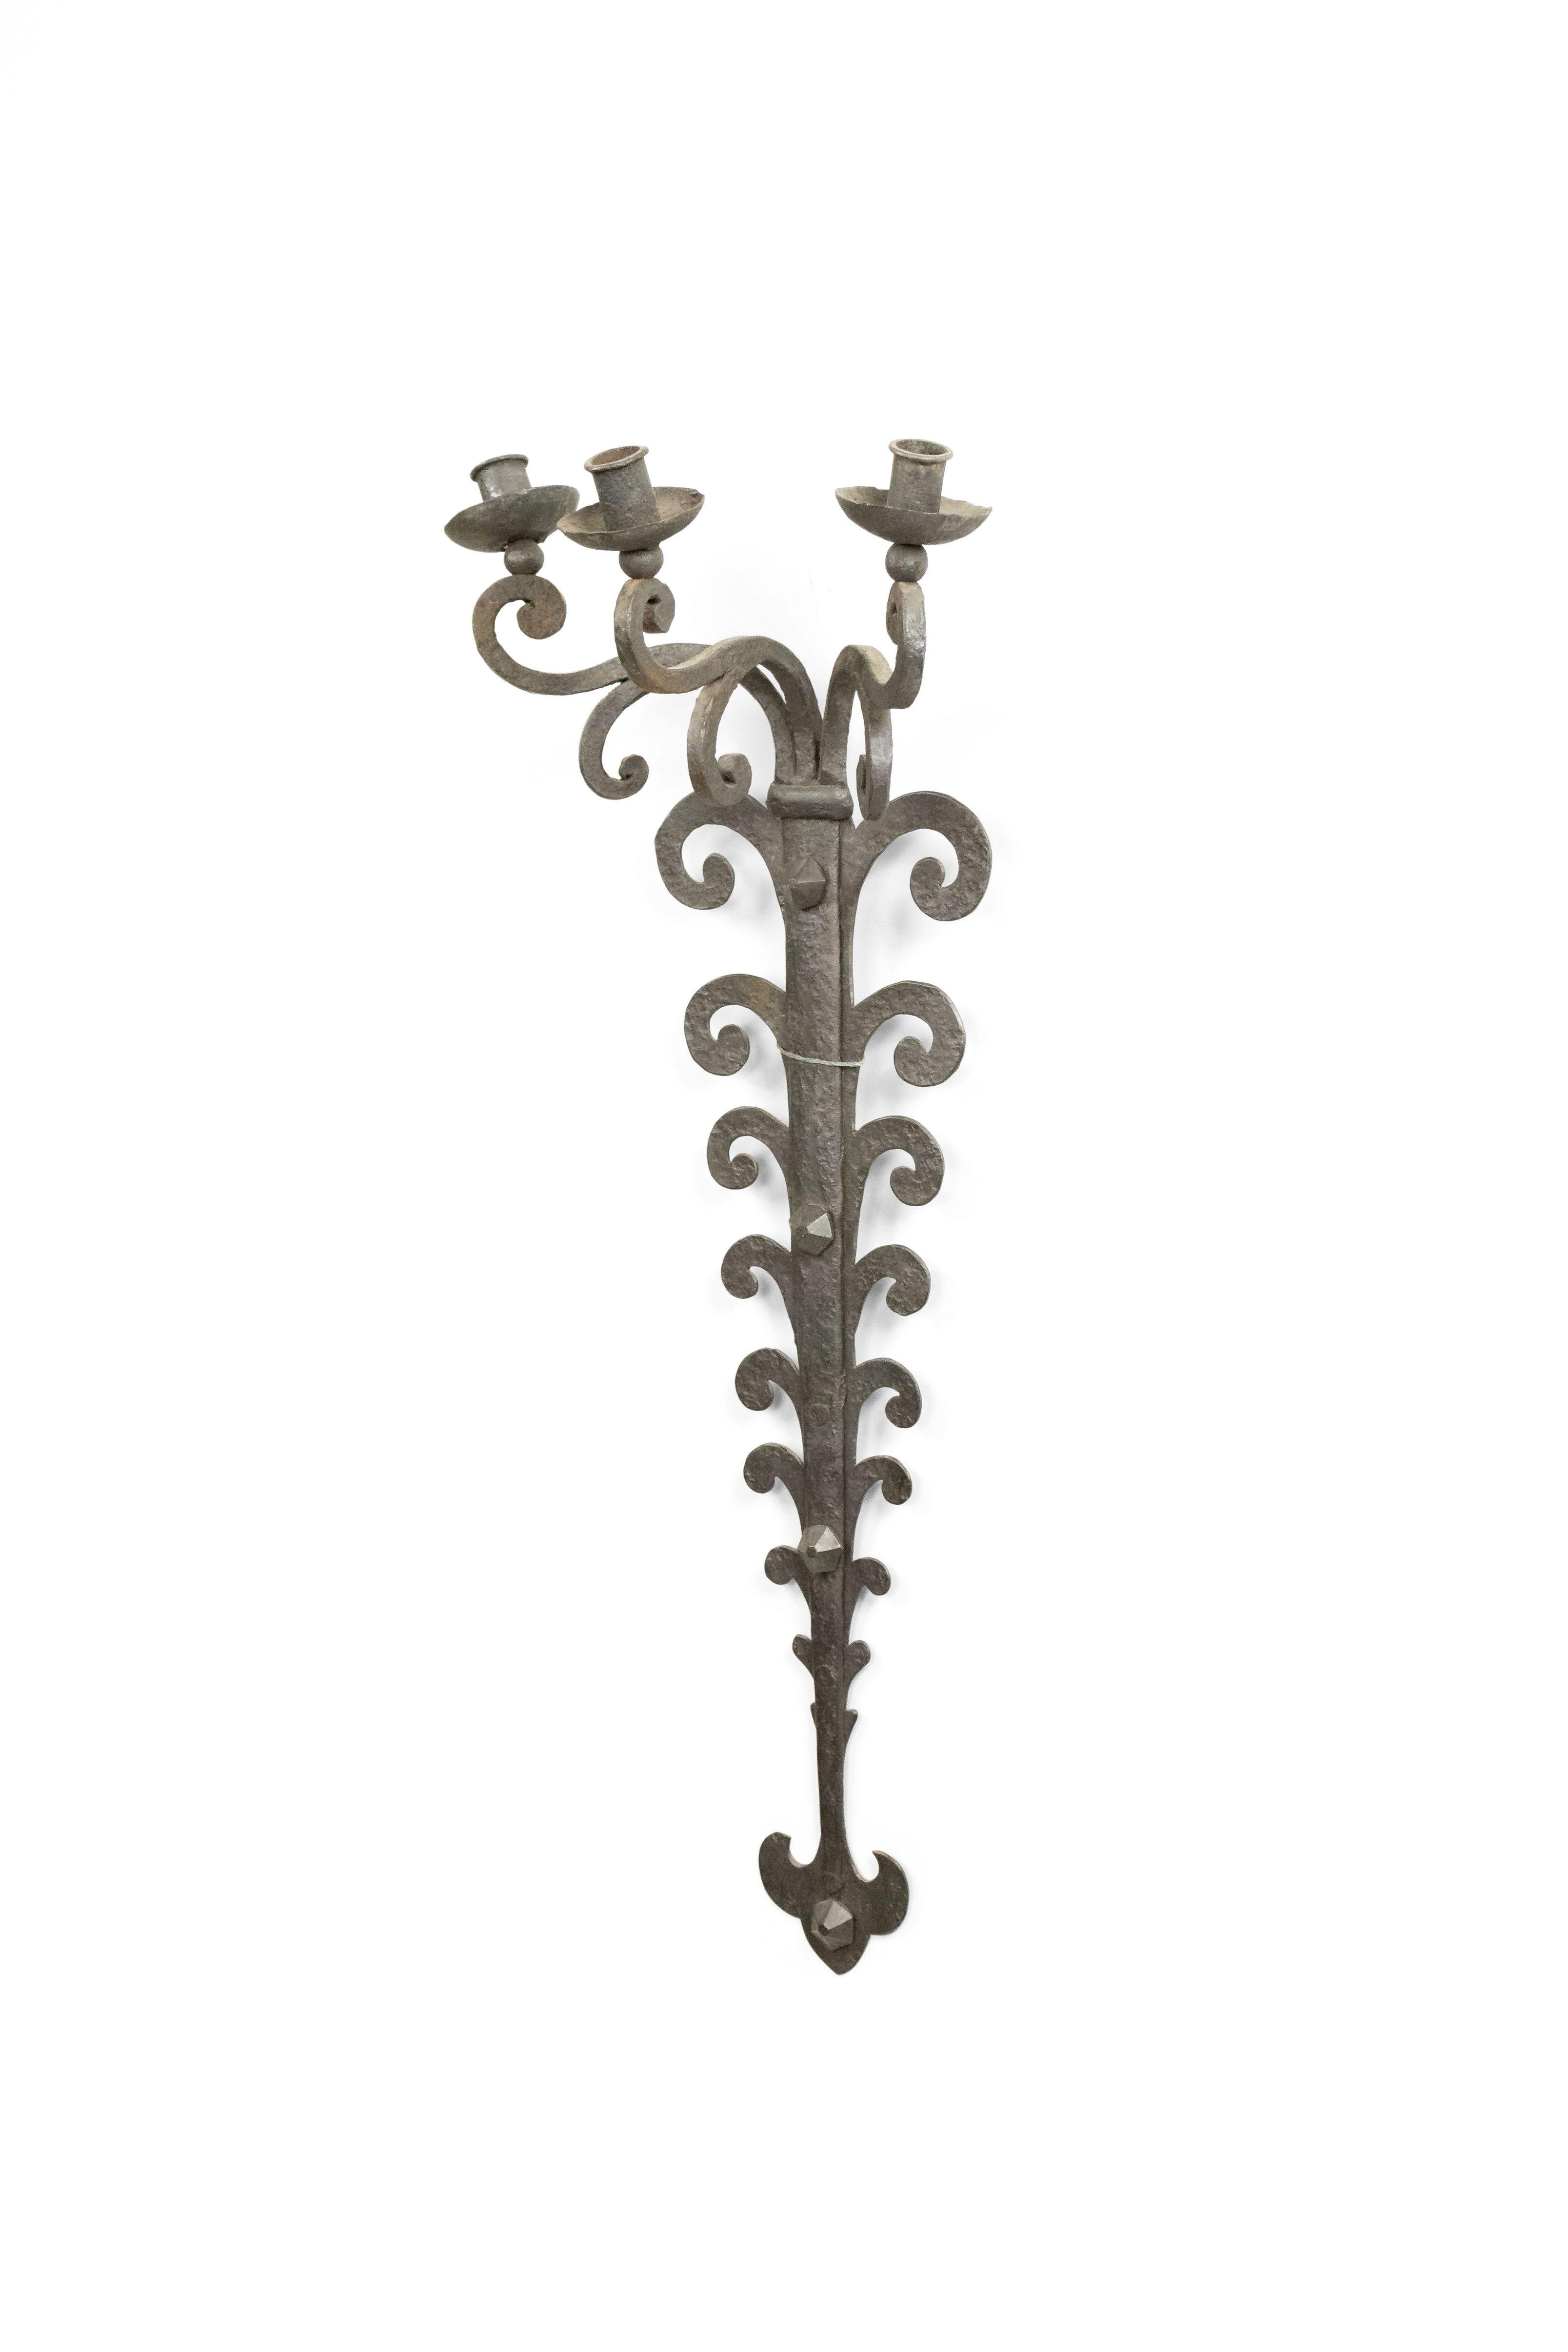 Pair of Italian Renaissance Style Wrought Iron Wall Sconces For Sale 2